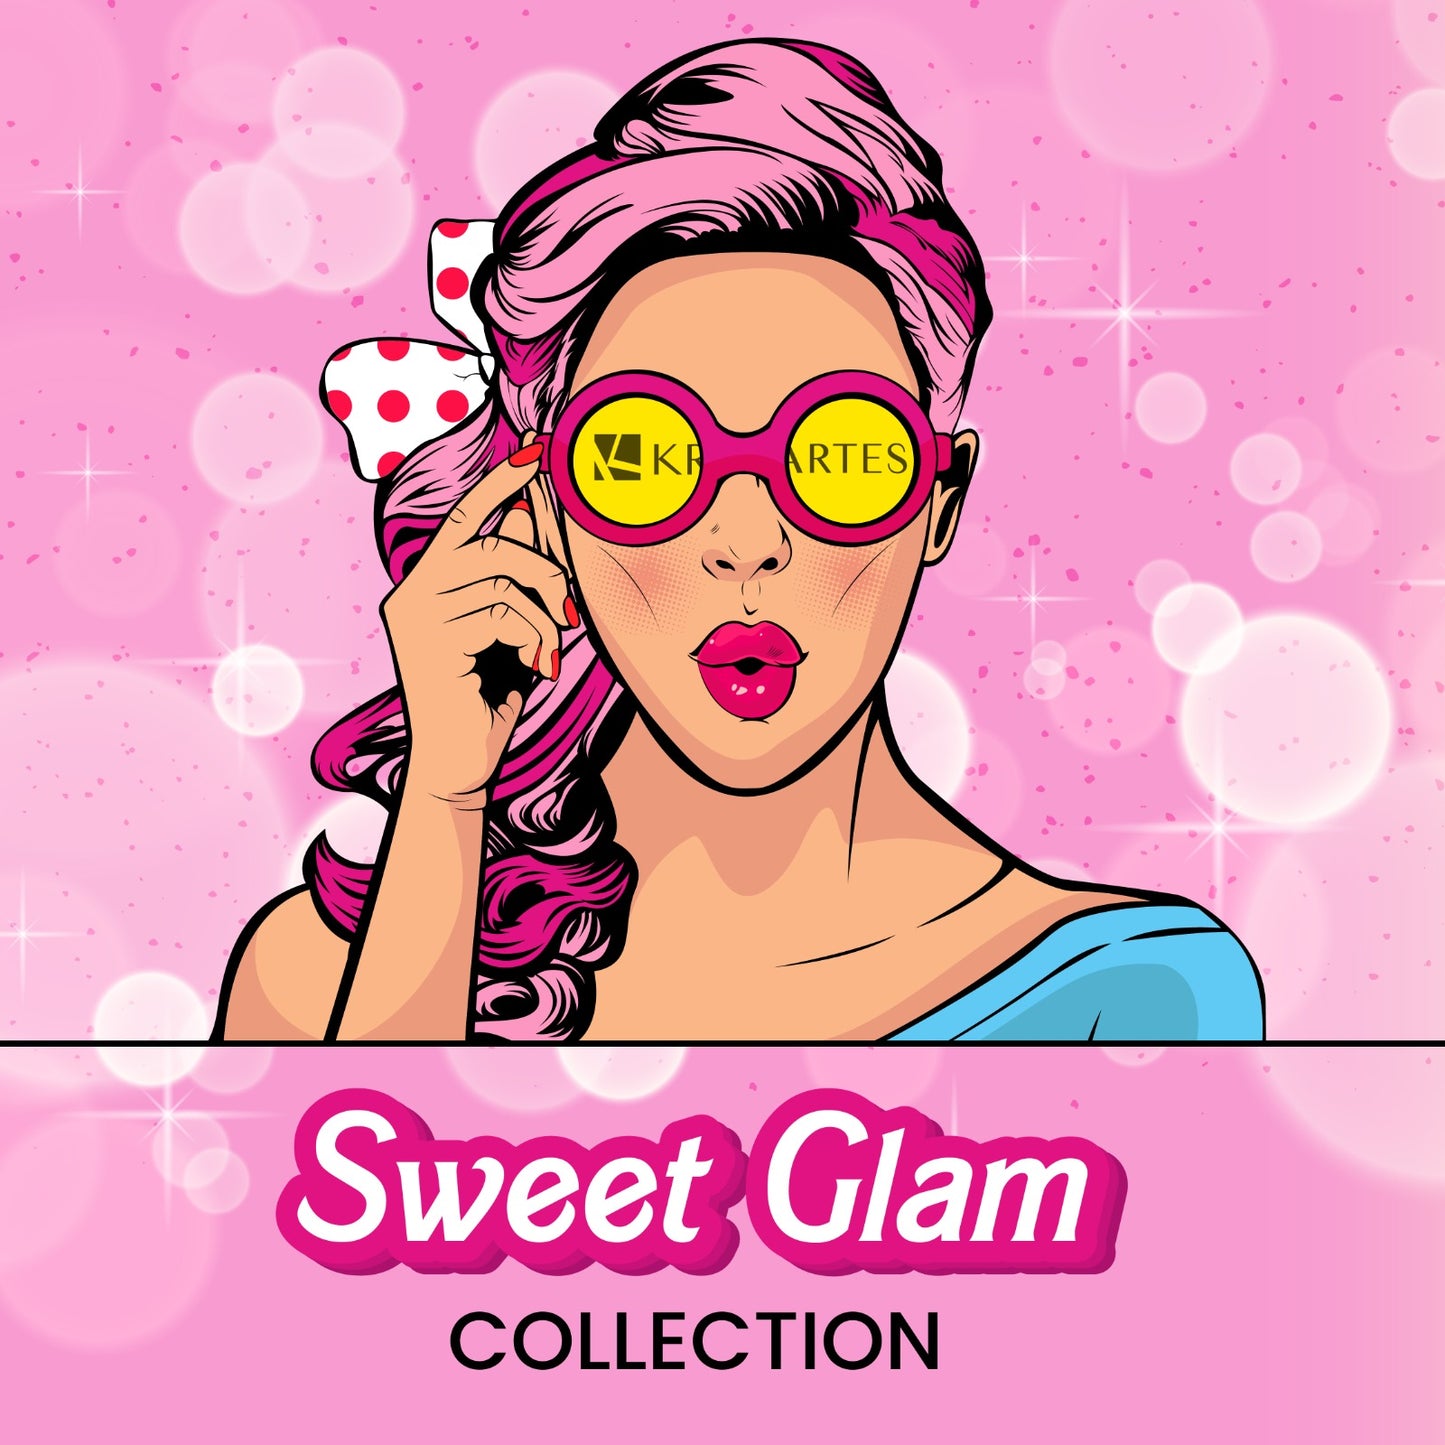 KREARTES BARBIE ACRYLIC SWEET GLAM COLLECTION